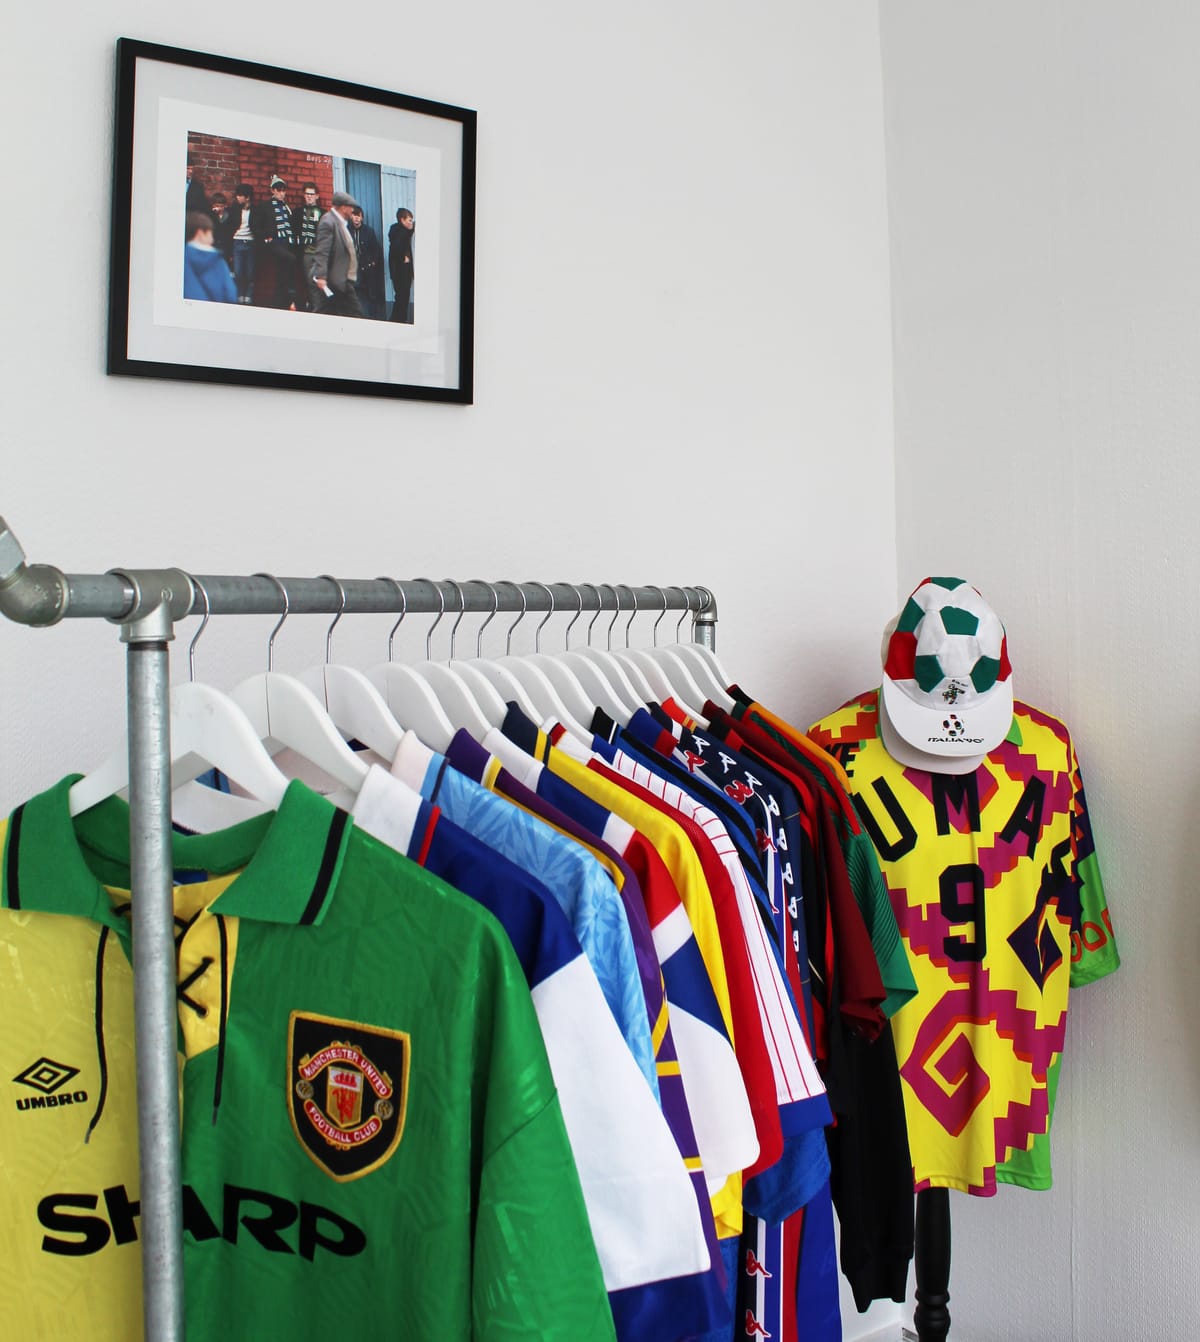 Coffeelin and Cult Kits team up for a vintage football shirt pop-up